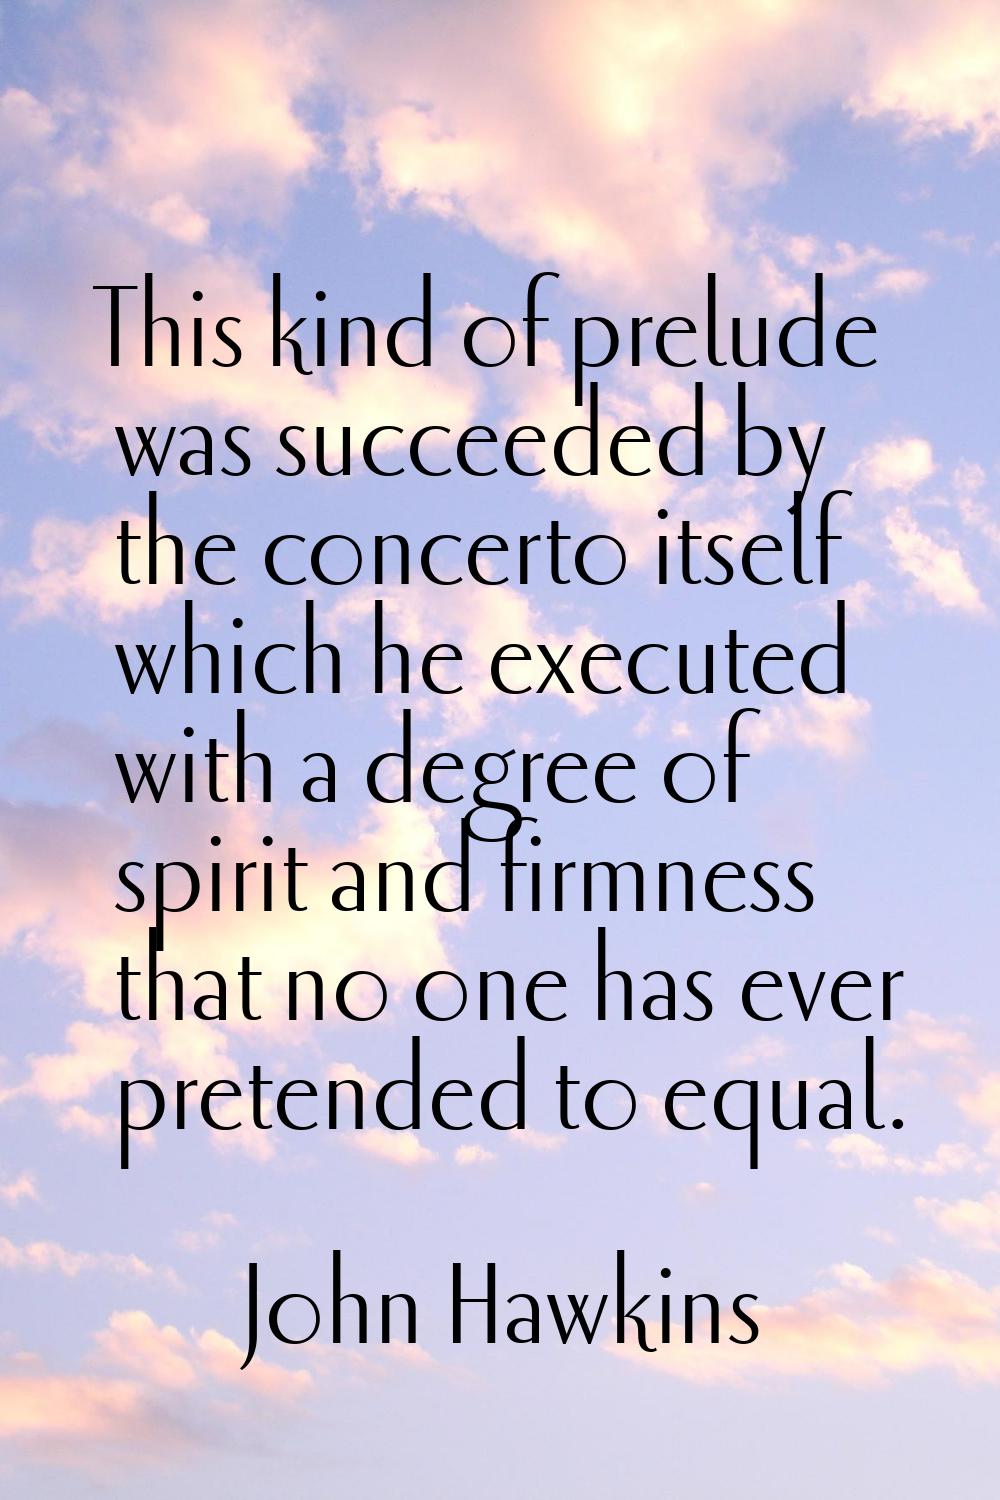 This kind of prelude was succeeded by the concerto itself which he executed with a degree of spirit